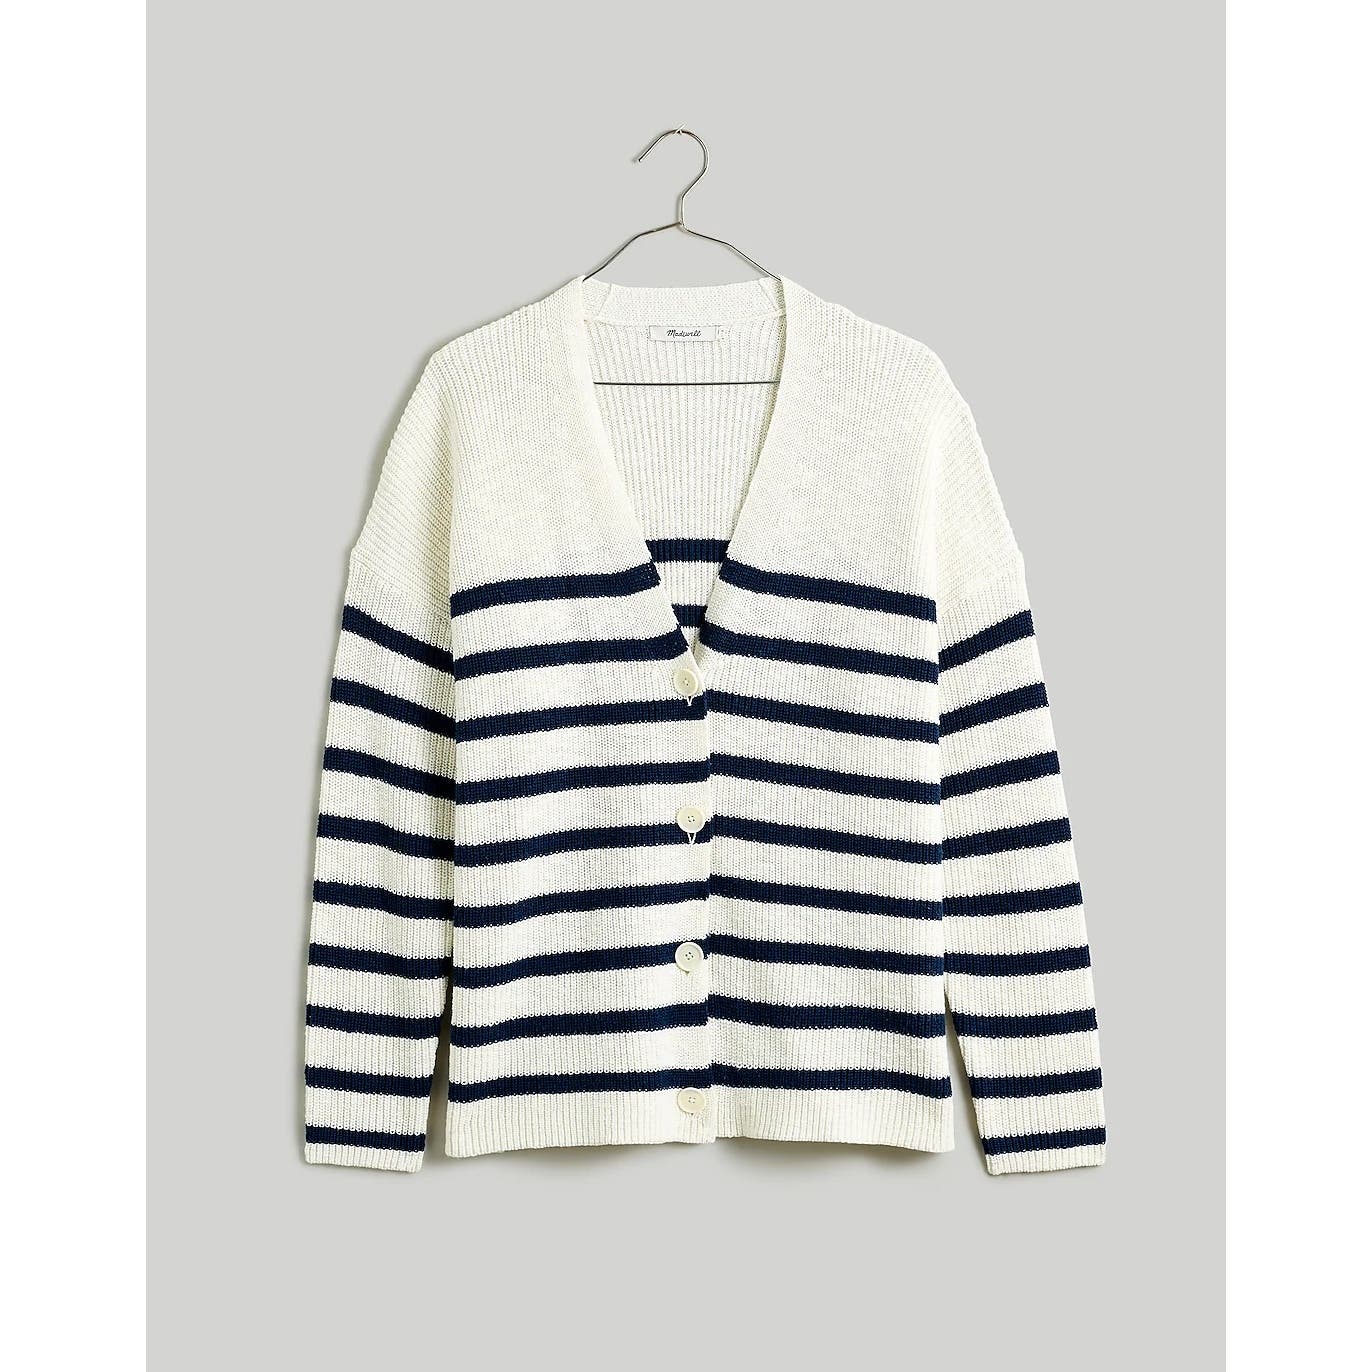 Madewell V-Neck Button-Front Striped Cardigan Sweater White Blue Small